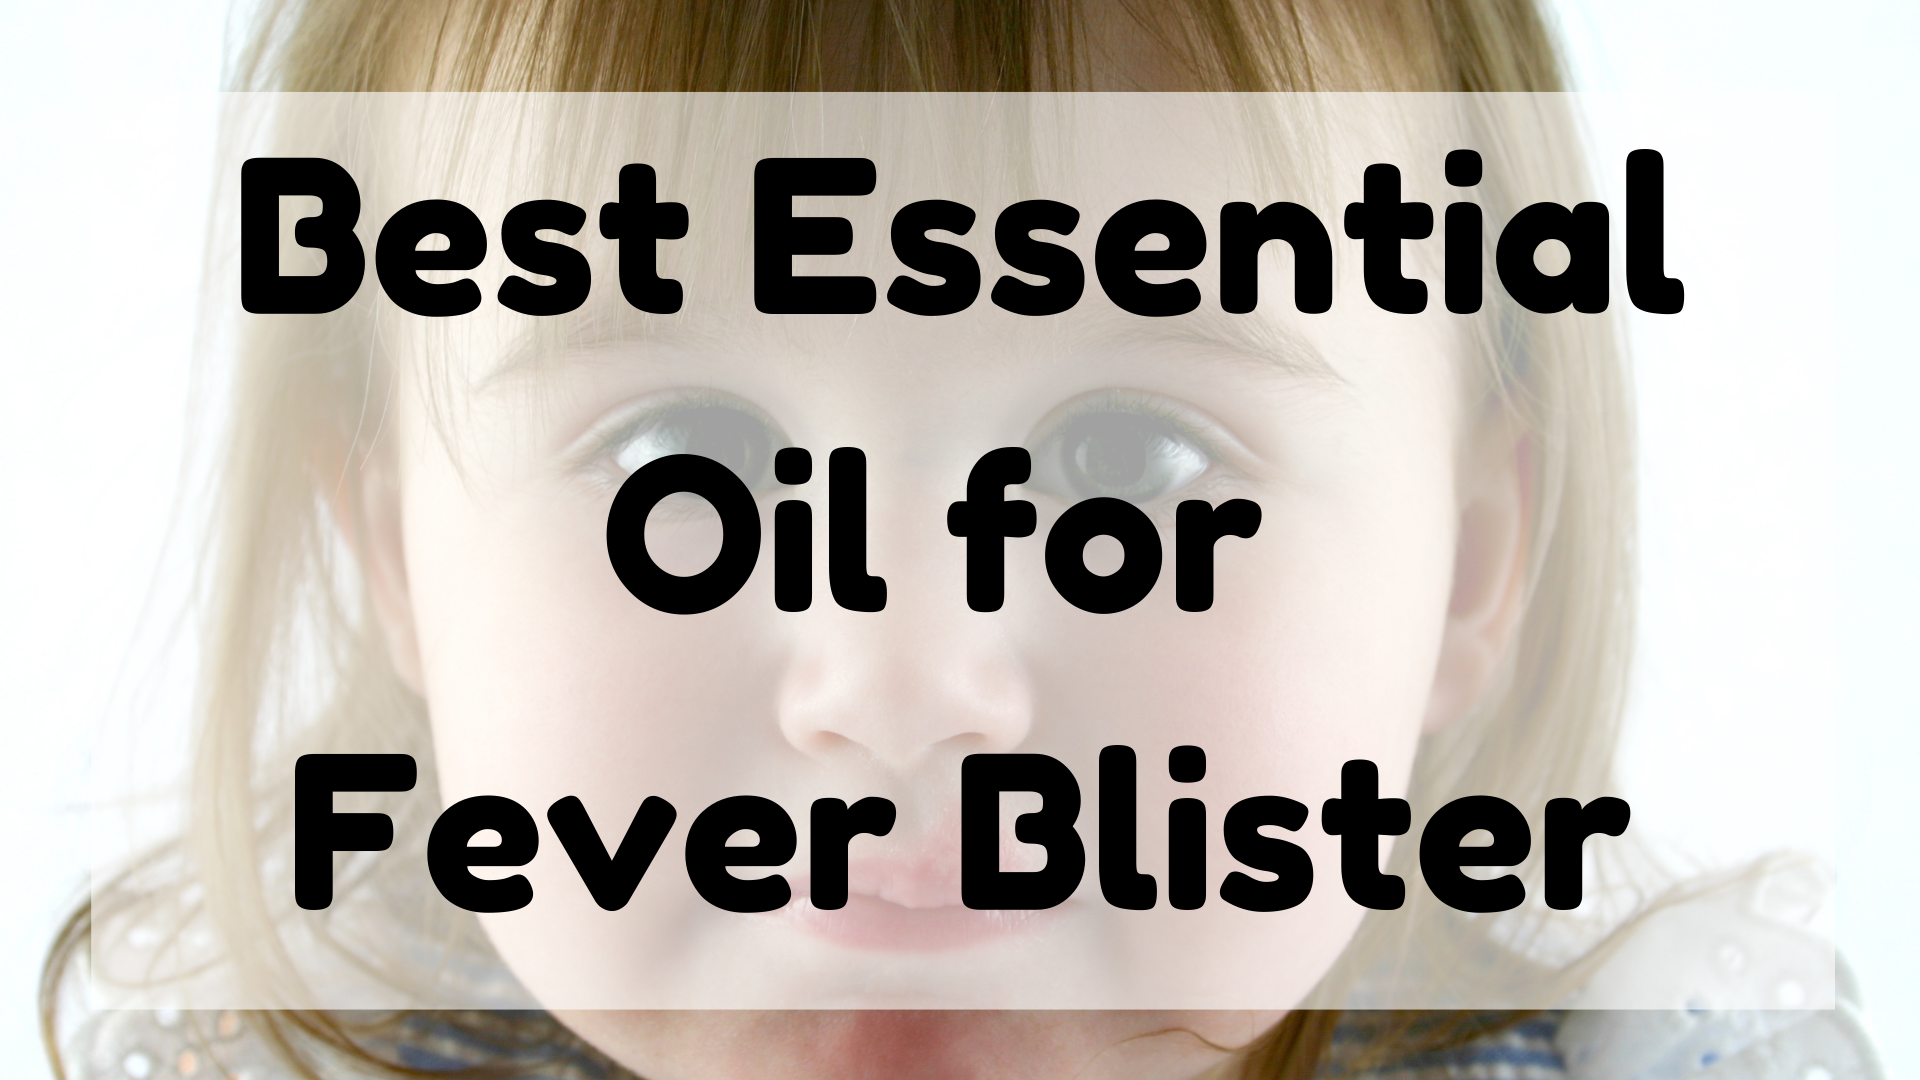 Best Essential Oil for Fever Blister featured image